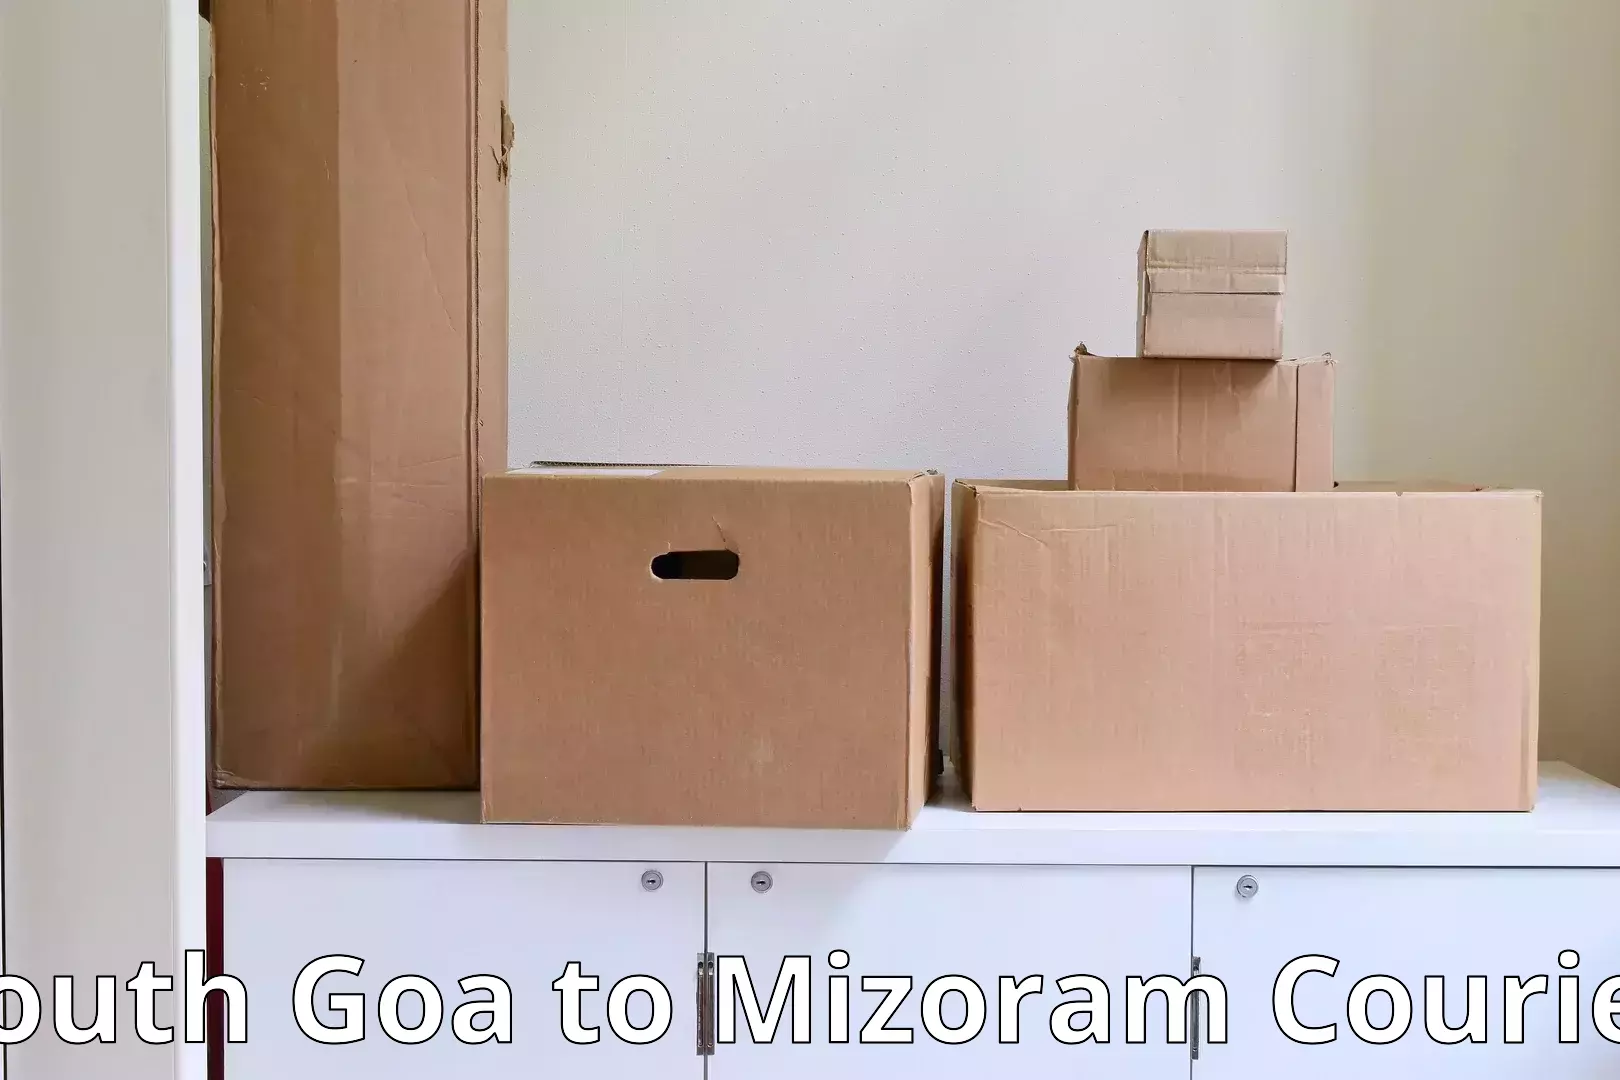 Trusted relocation experts South Goa to Mizoram